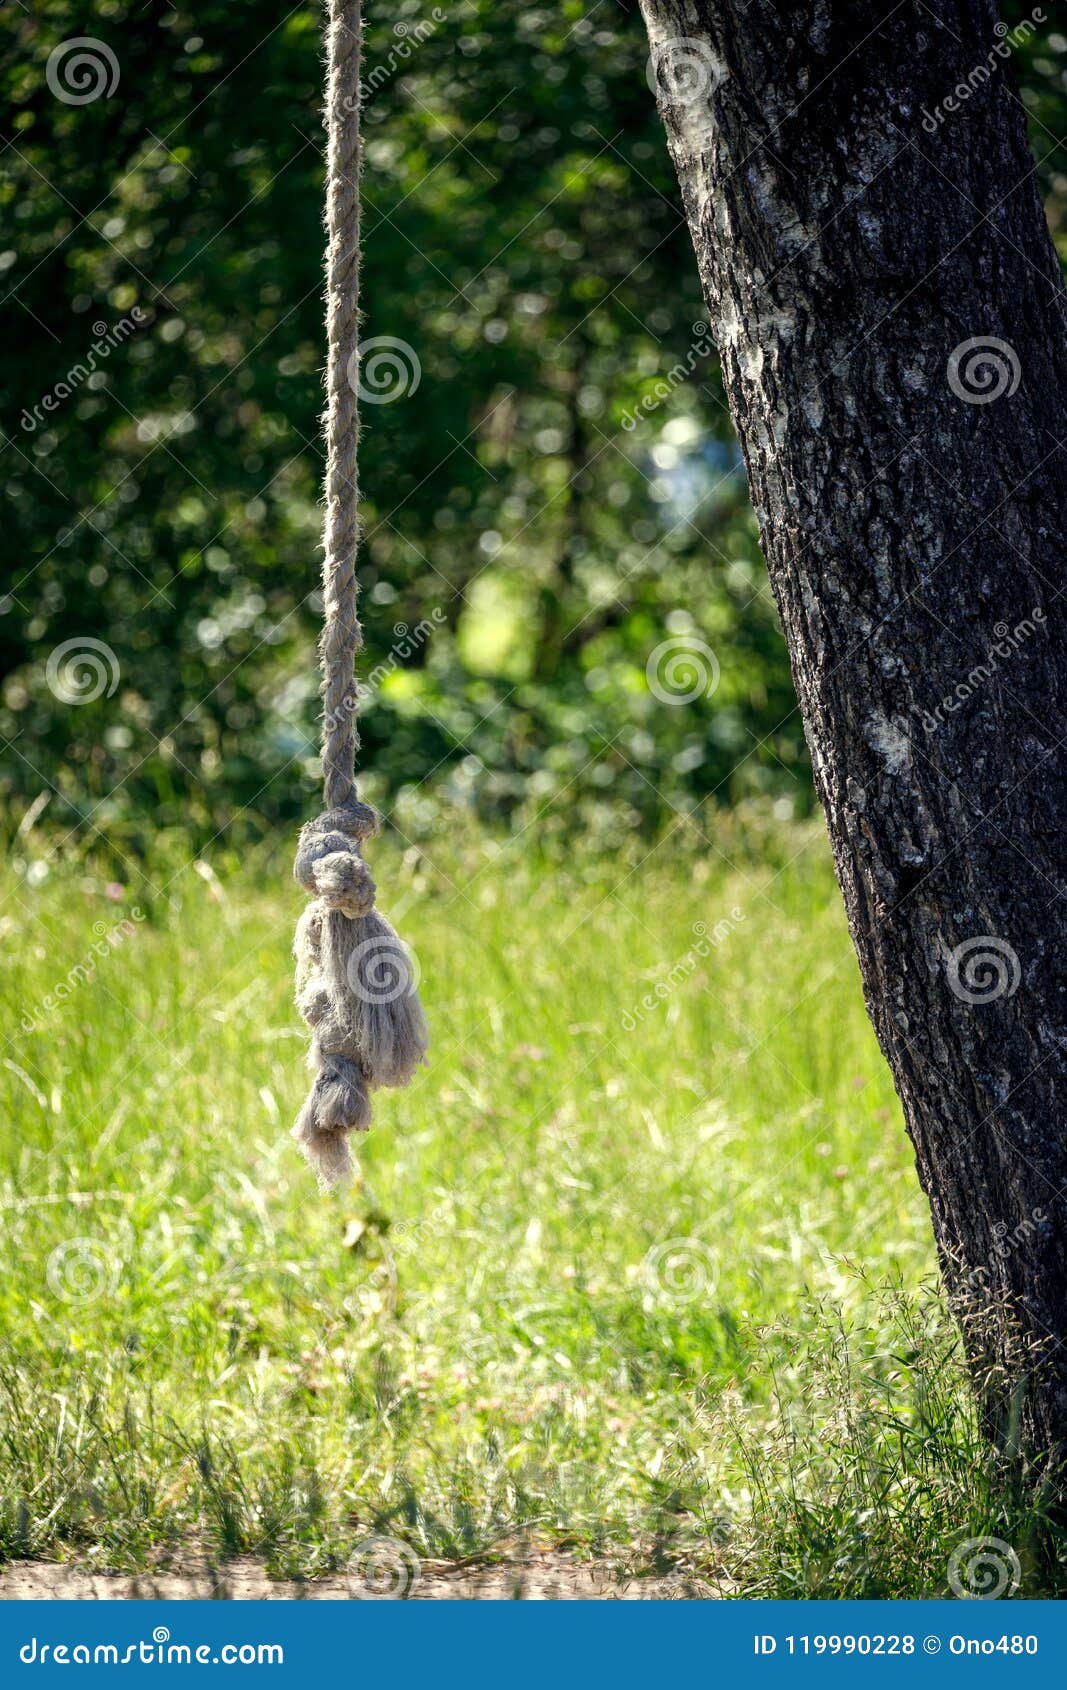 Homemade Swing Rope on a Tree Stock Photo - Image of person, play: 119990228